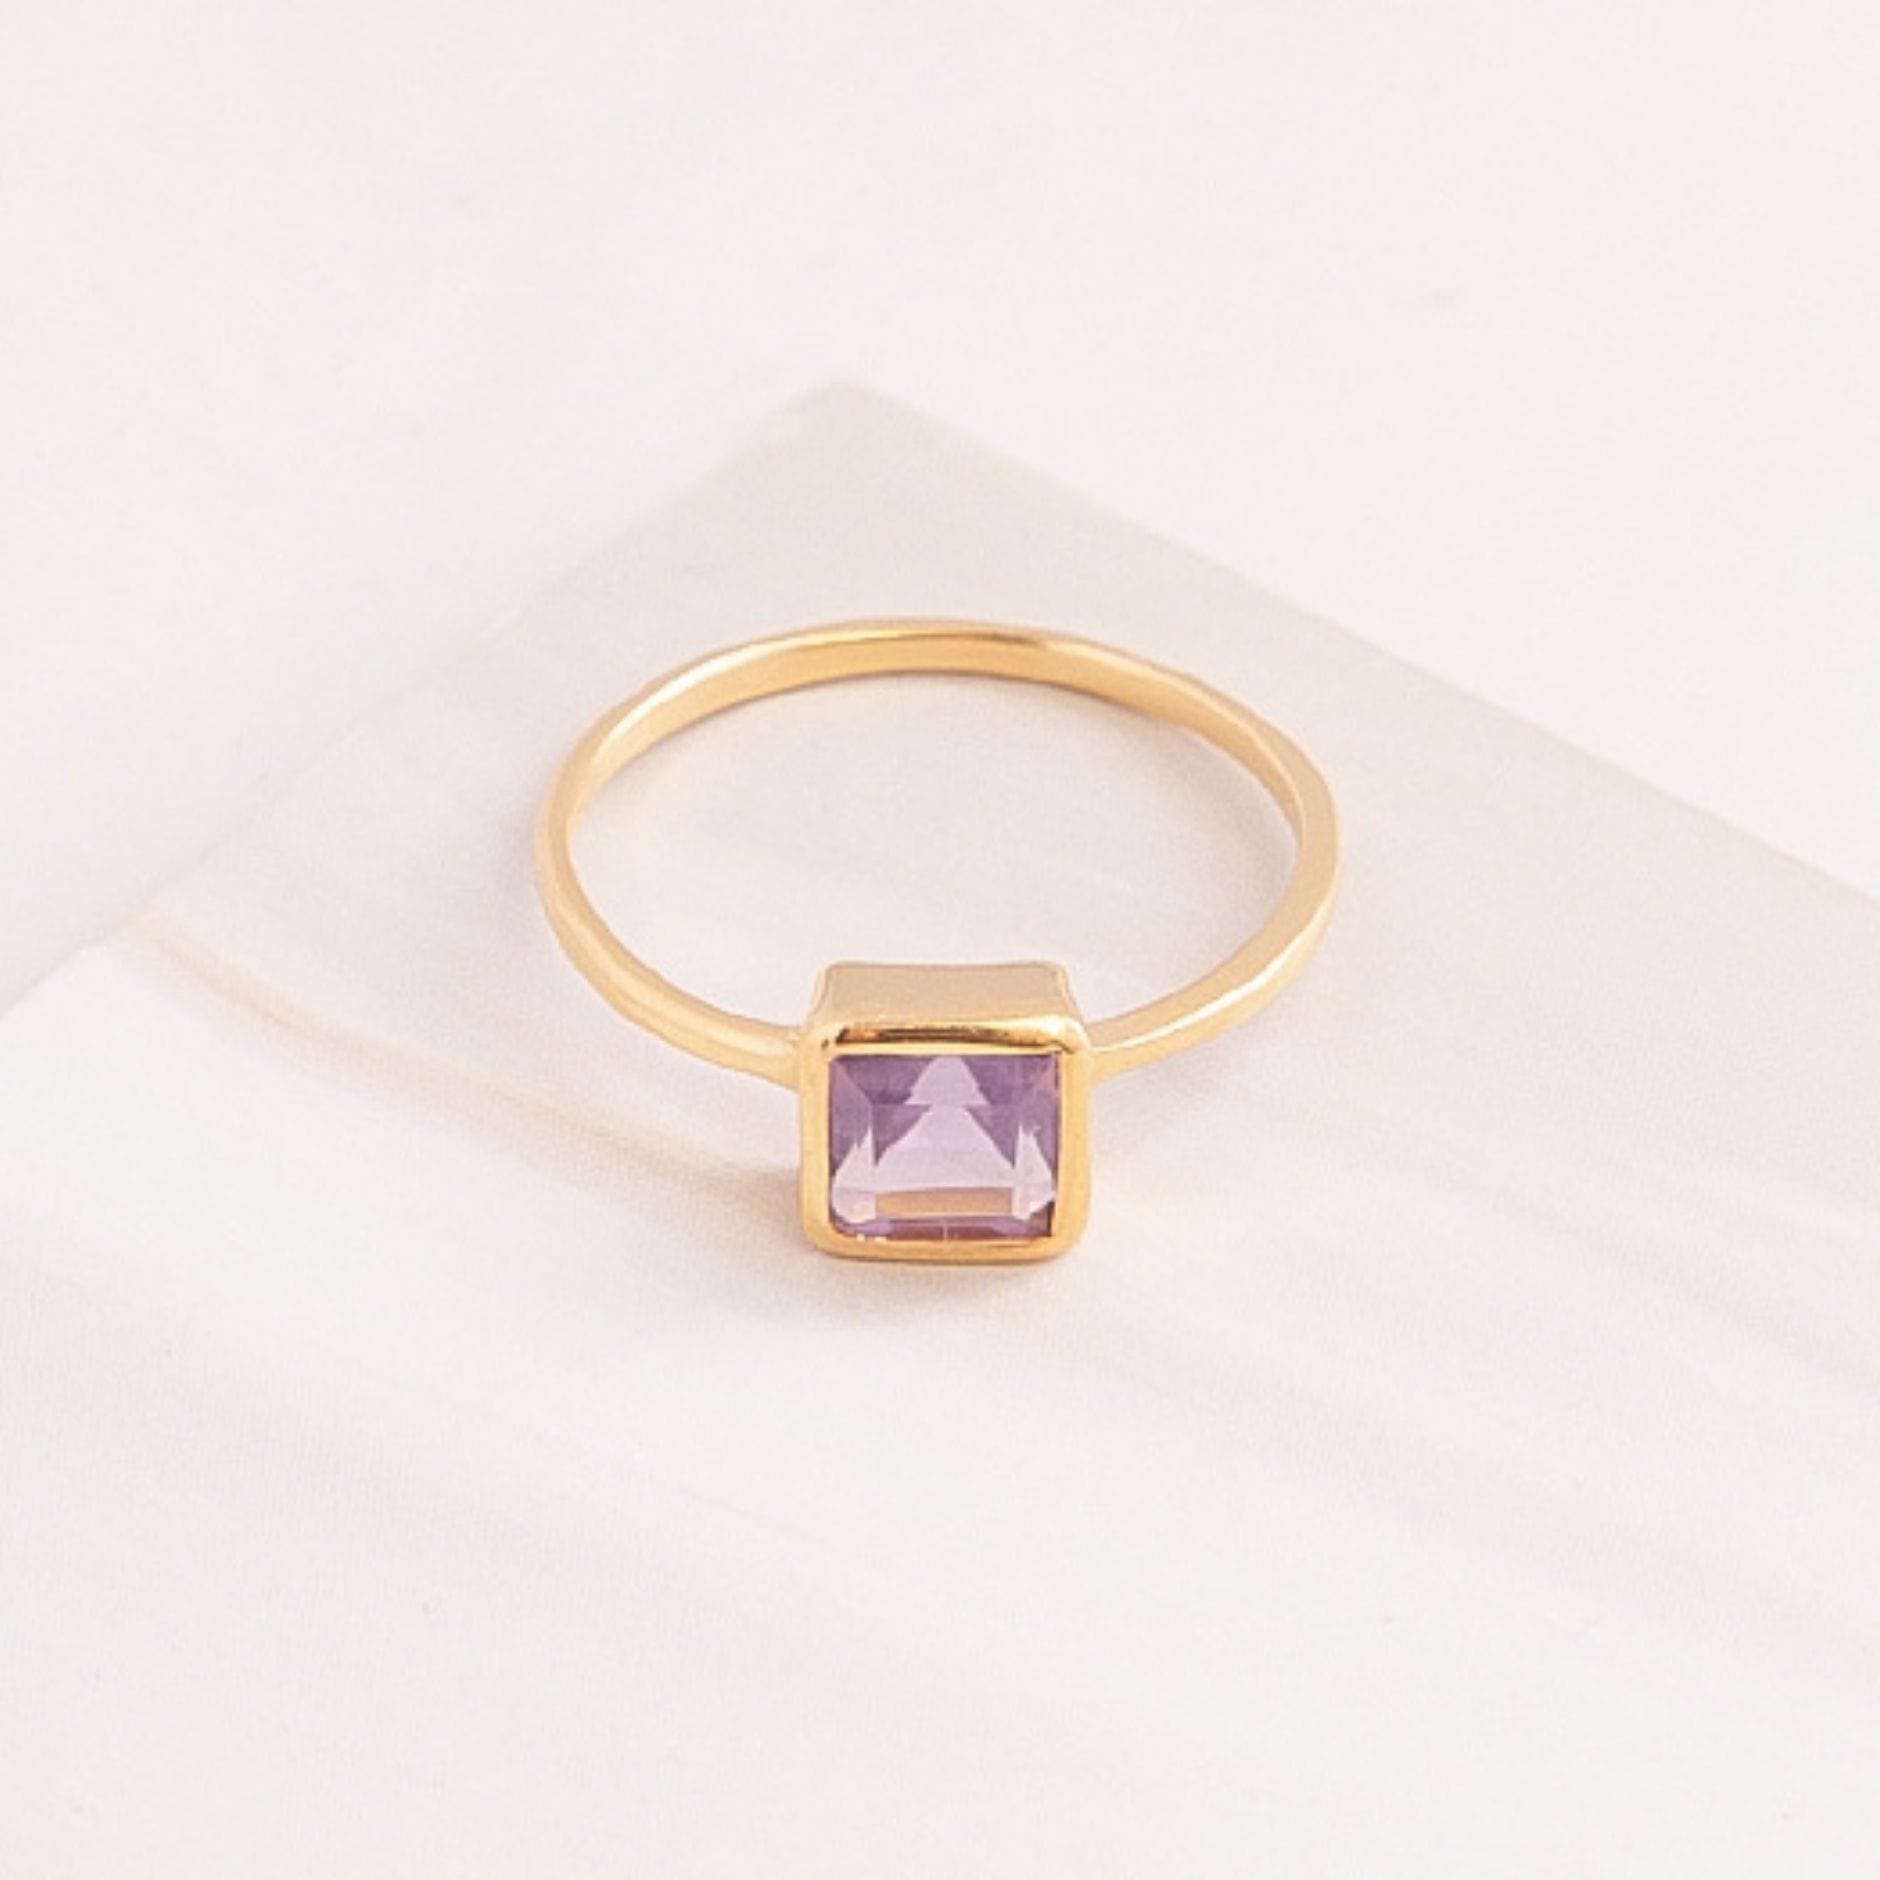 Emblem Jewelry Rings Purple Amethyst / Square Signature Candy Gemstone Stack Rings (Ring Size 7)